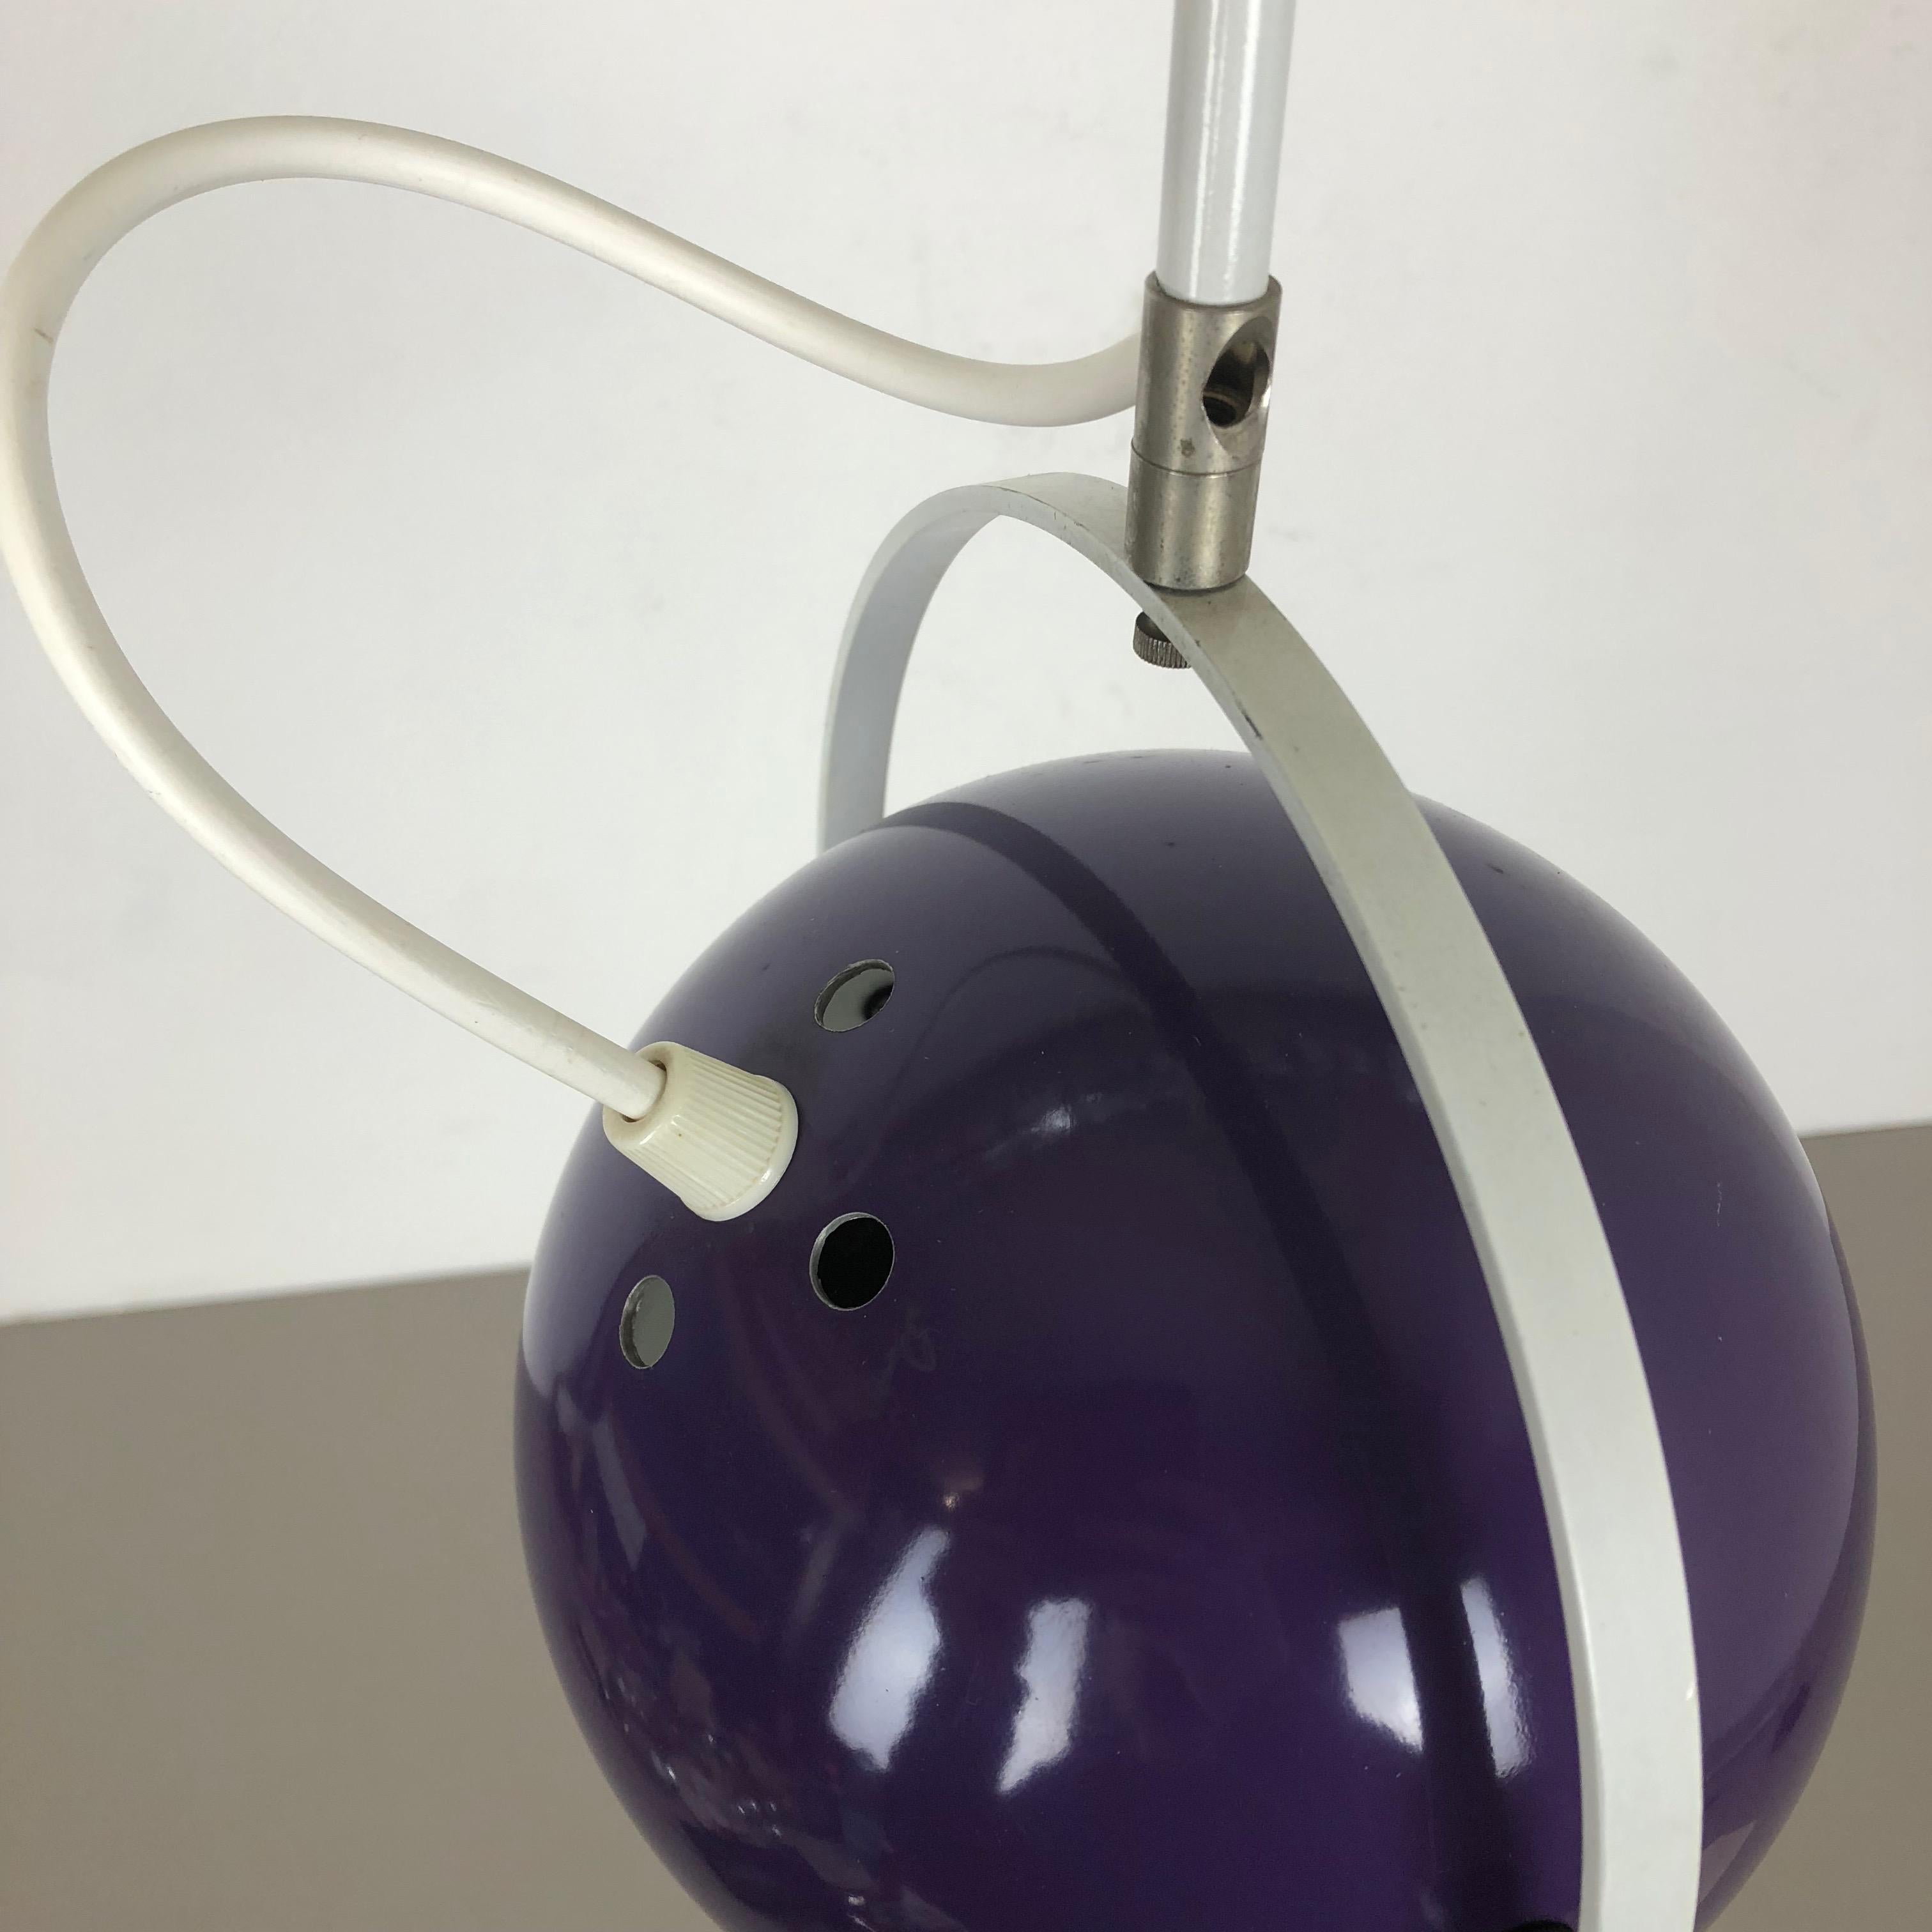 Adjustable Pop Art Panton Style Hanging Light with Purple Spot, Germany, 1970s For Sale 3